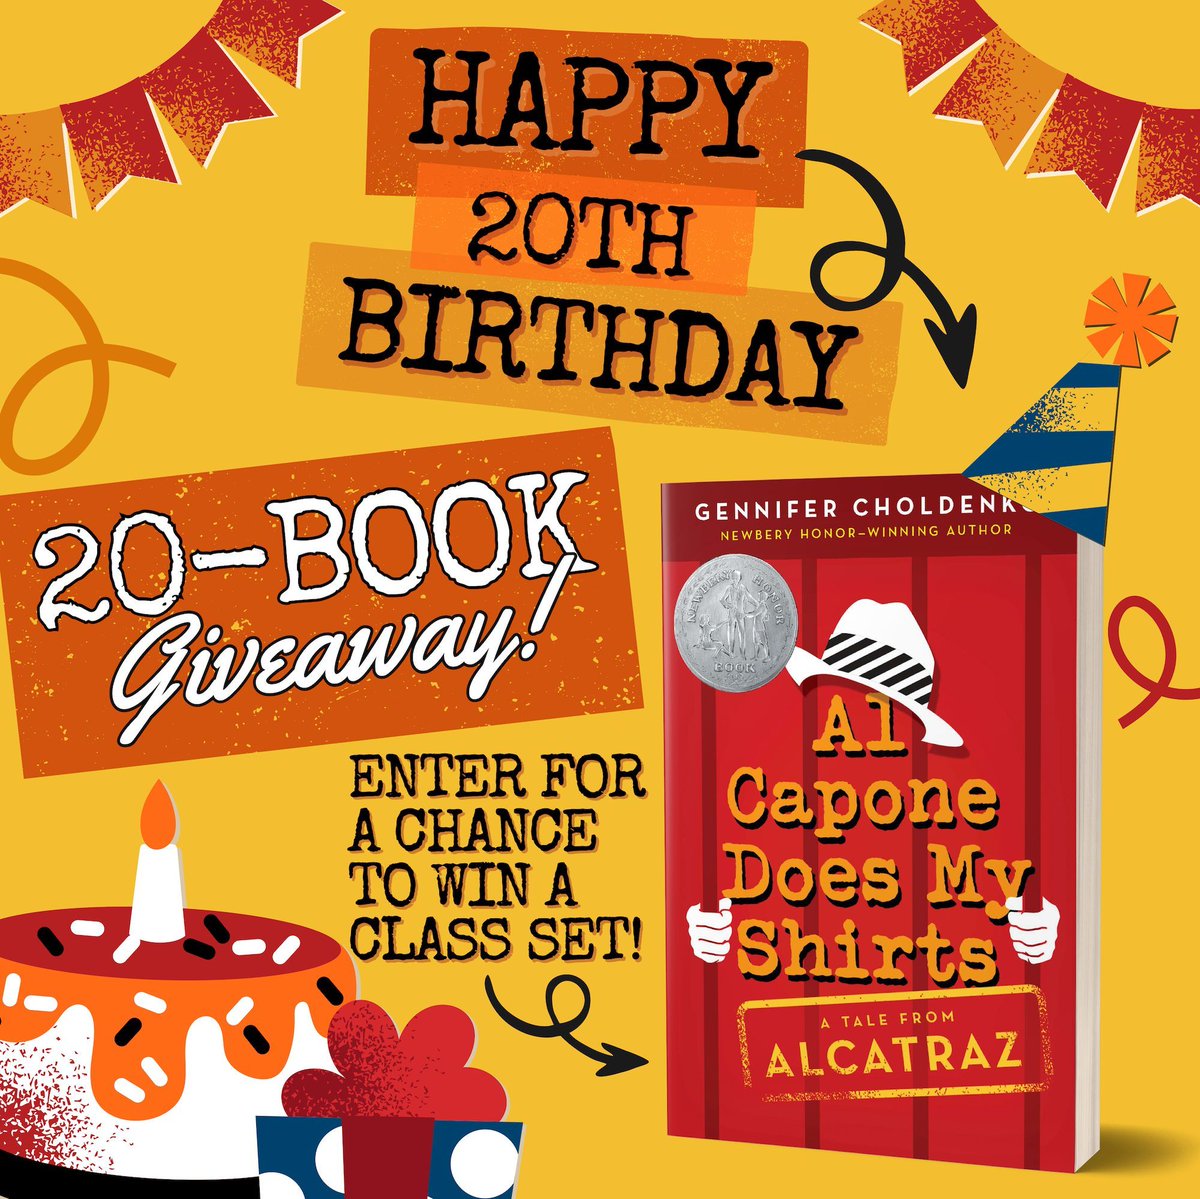 Wow... Today is AL CAPONE DOES MY SHIRTS' 20th birthday! 📕🎉 To celebrate 20 years, I'm giving away a set of 20 books to one lucky classroom! Educators, follow me and RT this post to enter. Tag a teacher friend for an extra entry. Ends April 5 @ 4pm PT. US only. @penguinkids